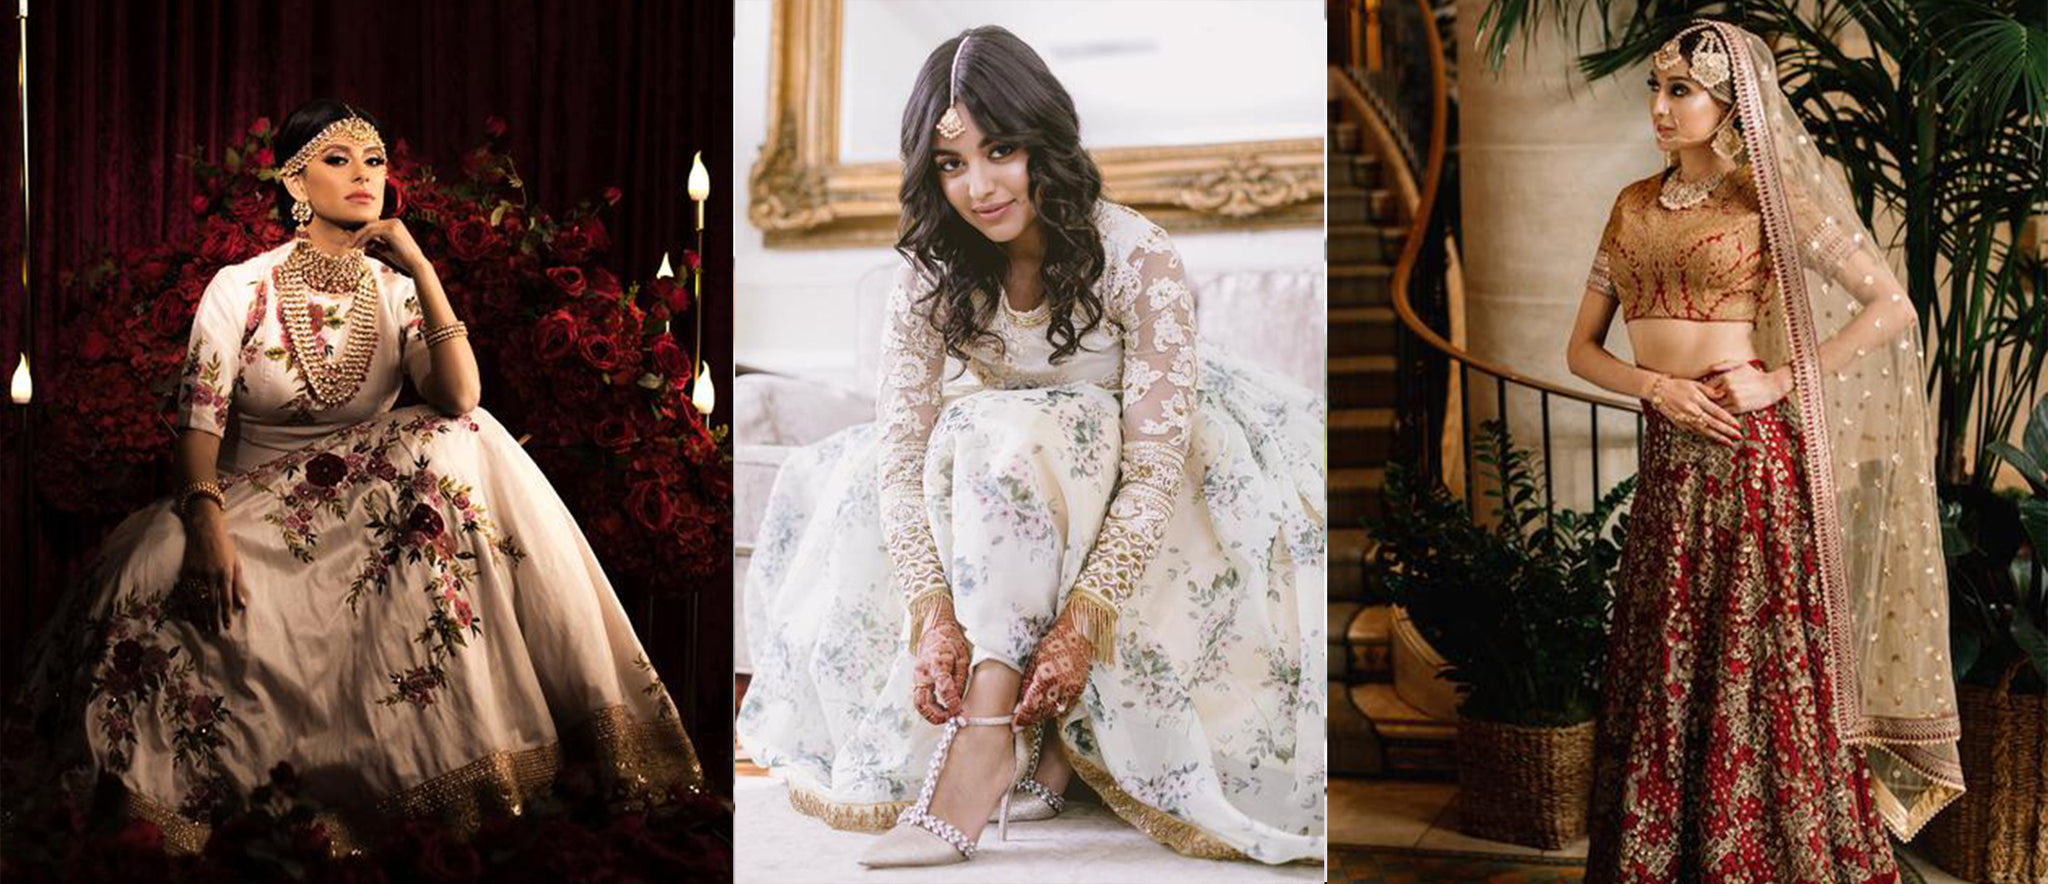 6 Dupatta Styles That Can Revamp The Look For Any Modern Indian Bride